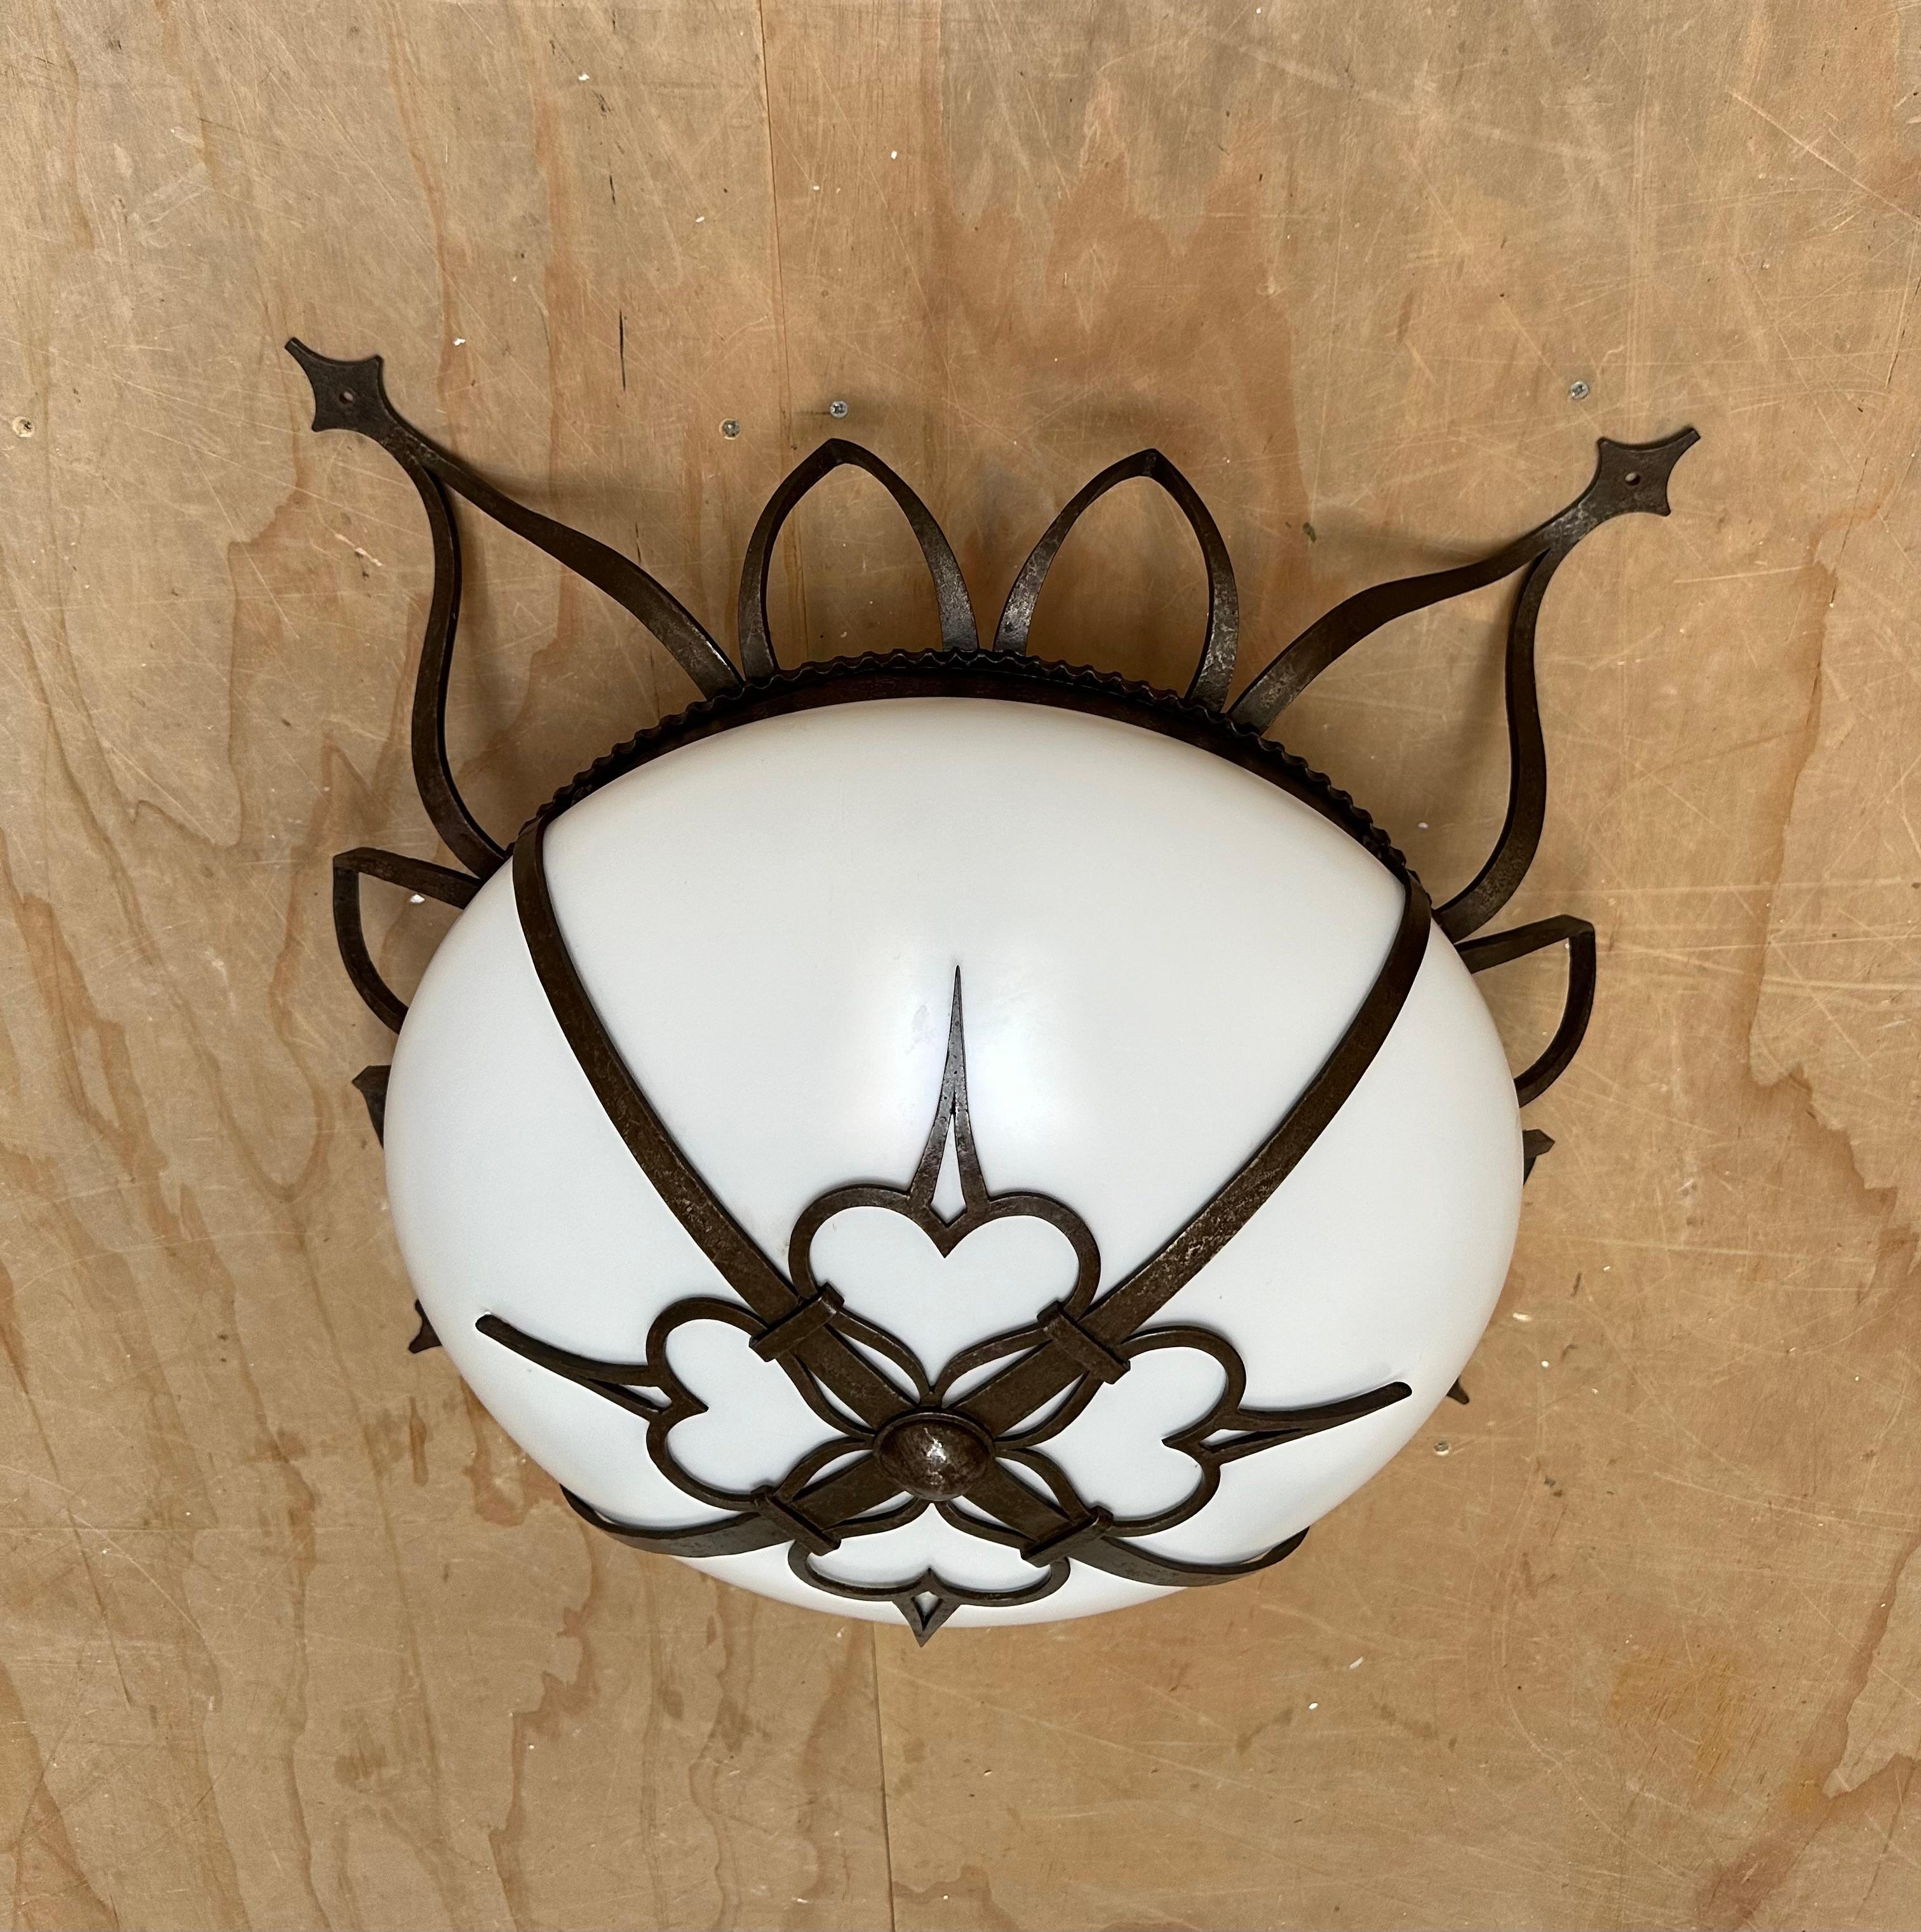 Antique hand crafted, stylized sunburst design two light flushmount / fixture.

This 1920s two-light flush mount has the most serene look and feel and you will hardly ever find a light fixture from the early 1900s era in this good of a condition.